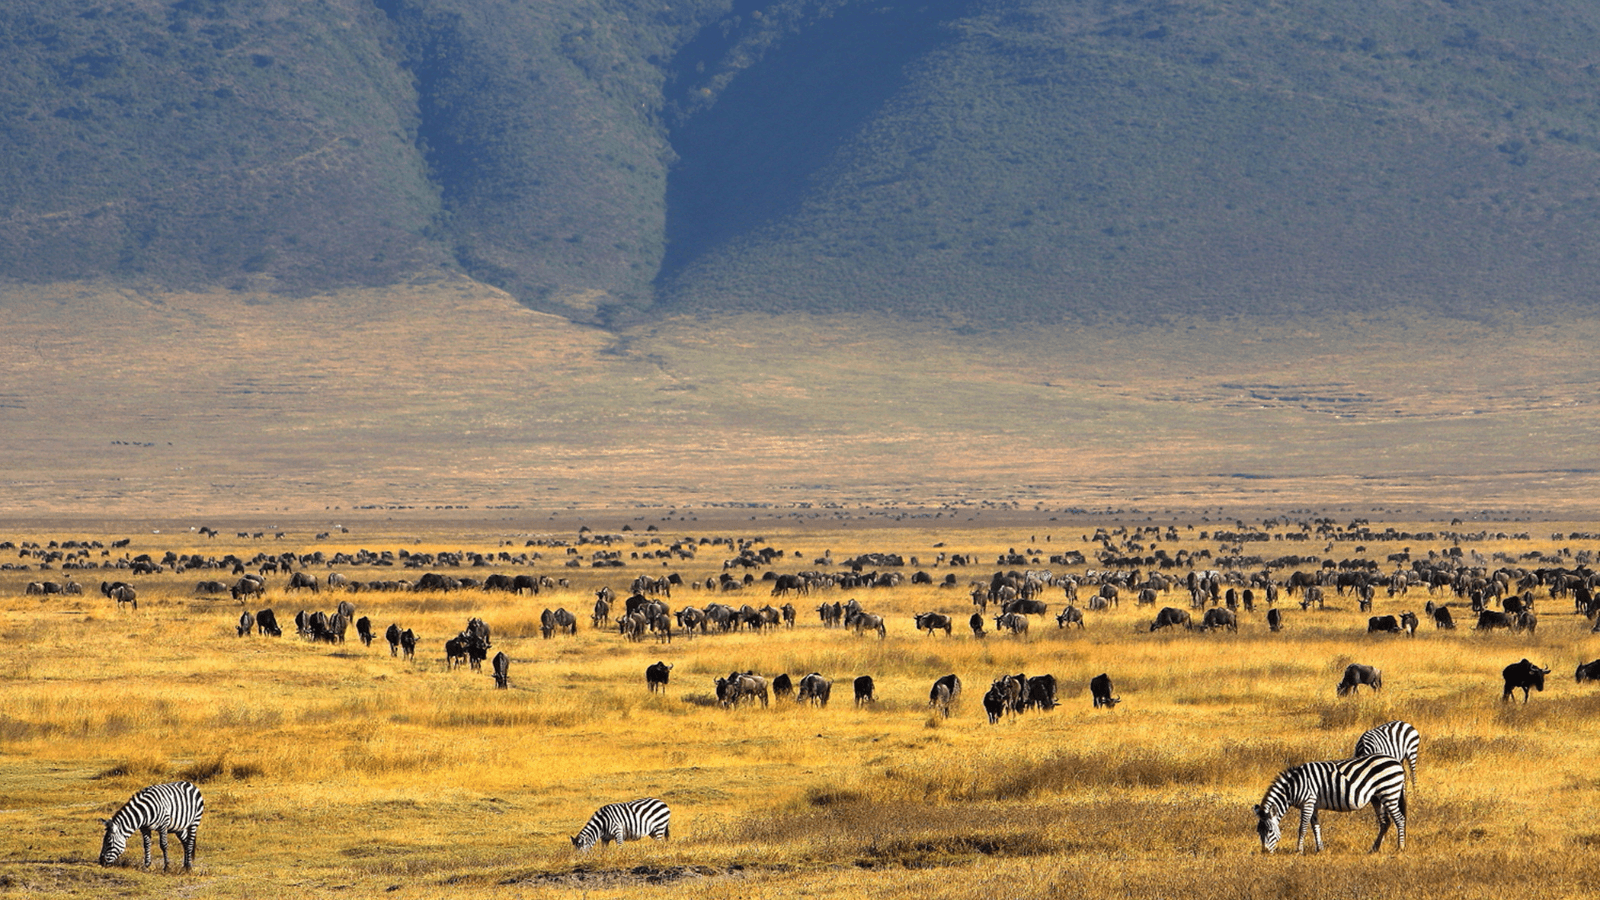 When it comes to wildlife, the Ngorongoro Crater is a haven for animal lovers. It is estimated that there are over 25,000 large animals within the crater, making it one of the densest concentrations of wildlife in Africa. Visitors to the crater can expect to see a variety of animals, including elephants, lions, cheetahs, giraffes, hippos, and zebras, just to name a few. There is also a high chance of spotting the elusive black rhino, as the crater is one of the best places in Africa to witness this rare creature in its natural habitat.